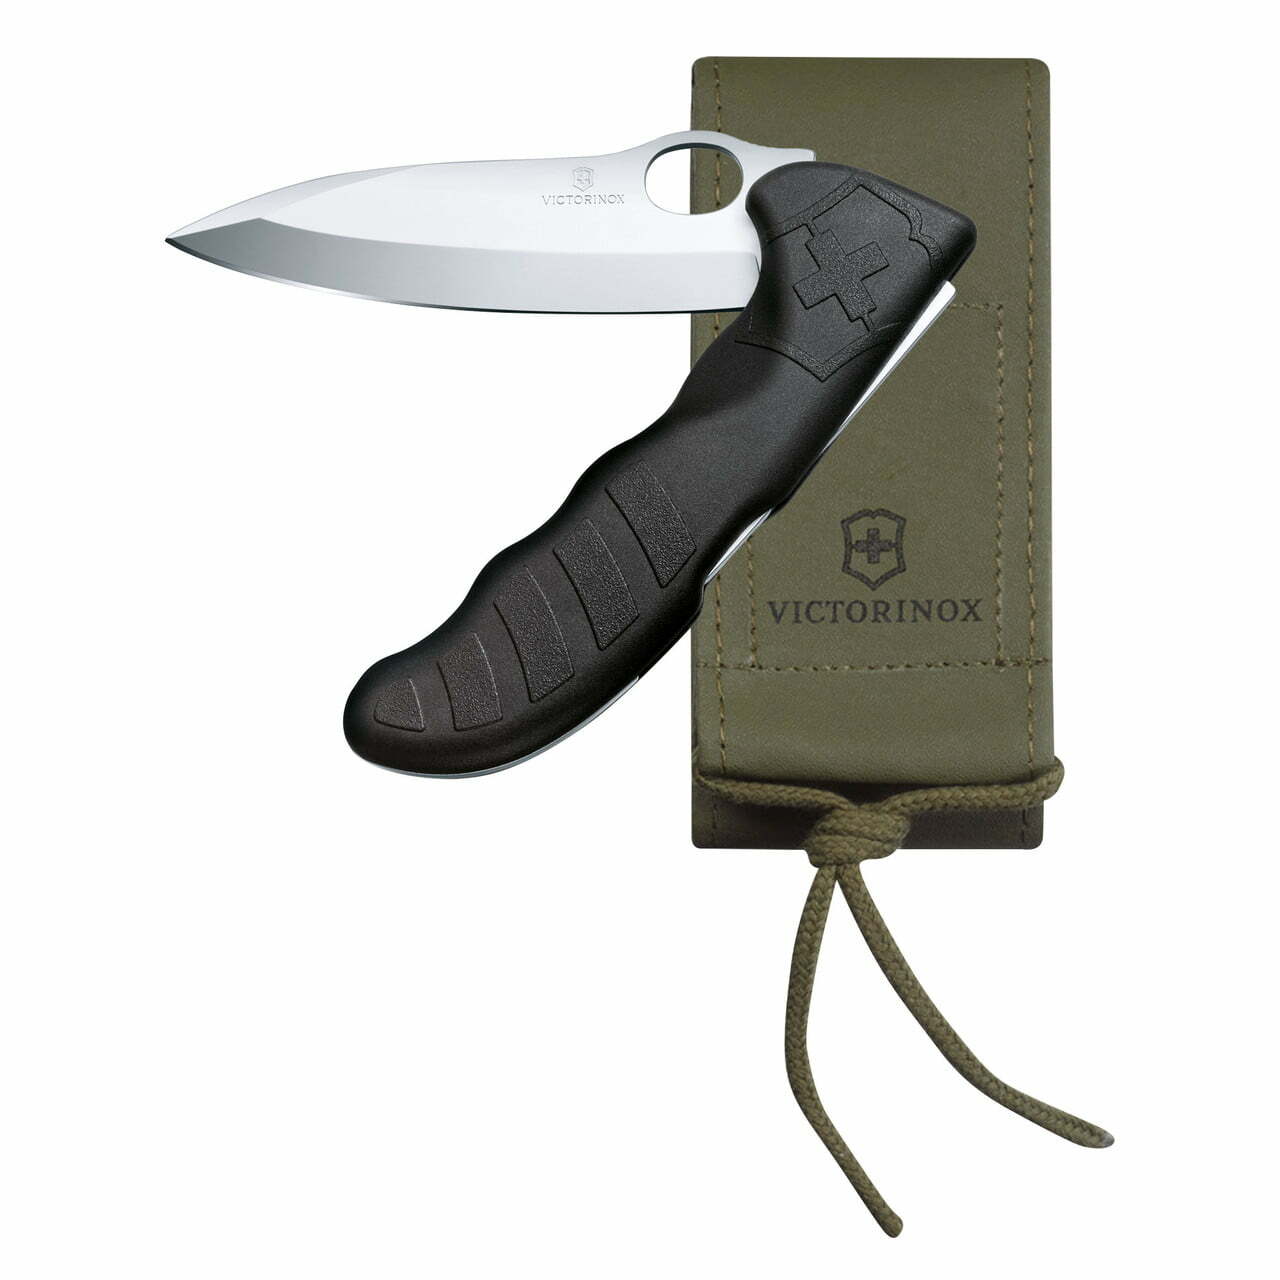 FireChef Knife Bundle - Premium Hand Forged Knives